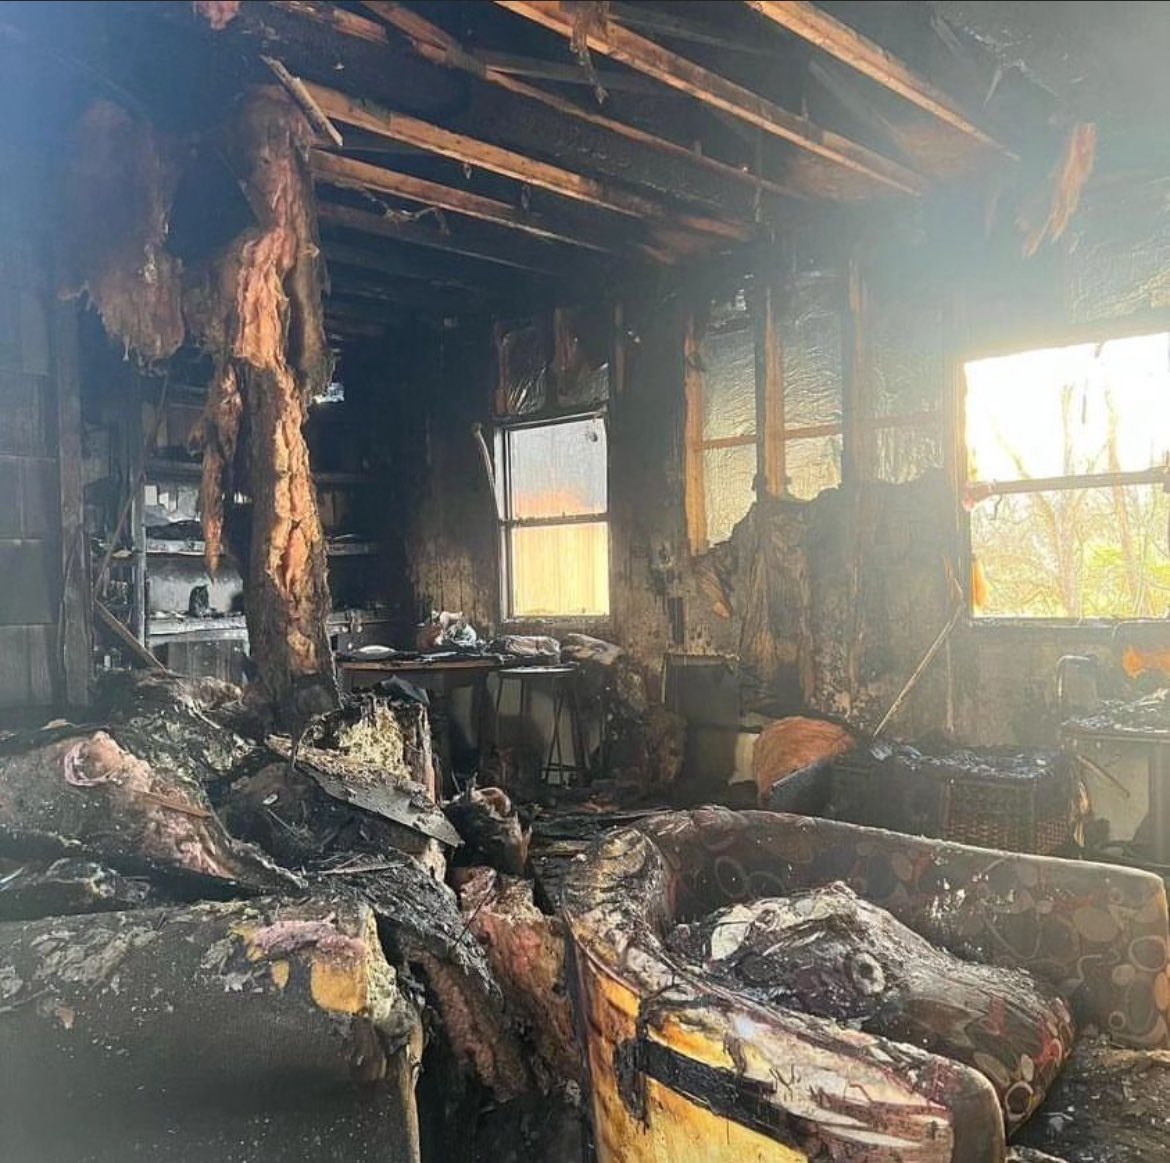 Our own Silas Mason suffered an unfortunate house fire today. More information can be found at the link below, if you’re able to help you can also donate to him and his family. gofundme.com/f/help-silas-m…